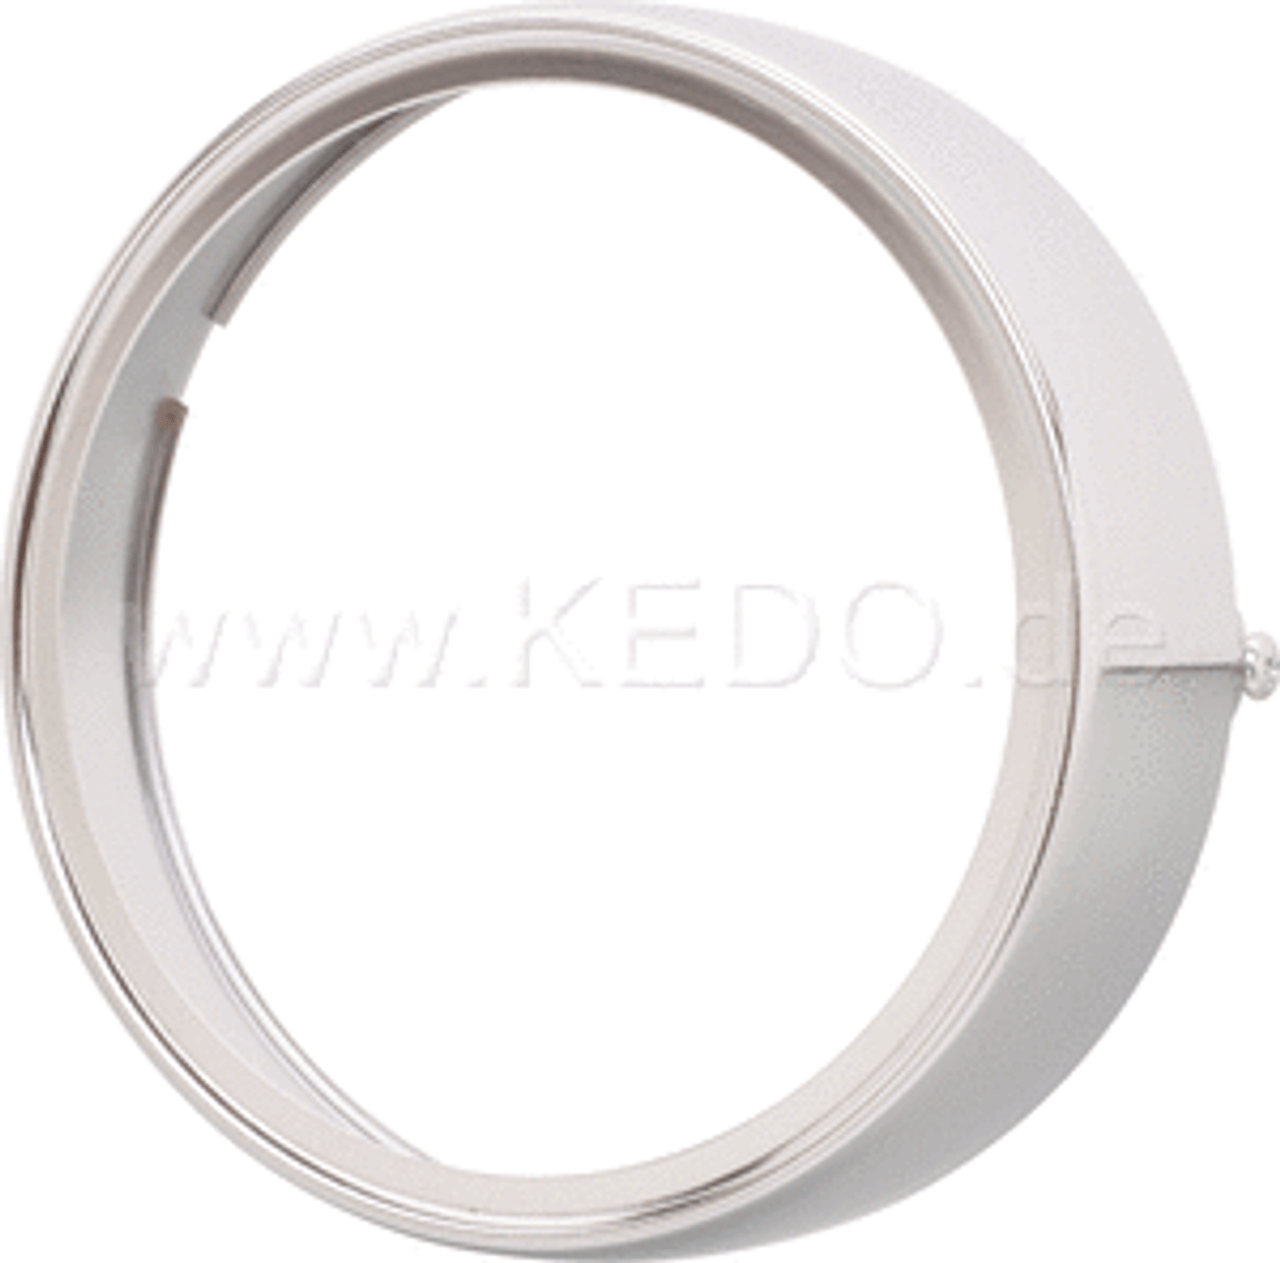 Headlamp Ring XT500 chrome plated, OEM reference # 1N5-84115-20